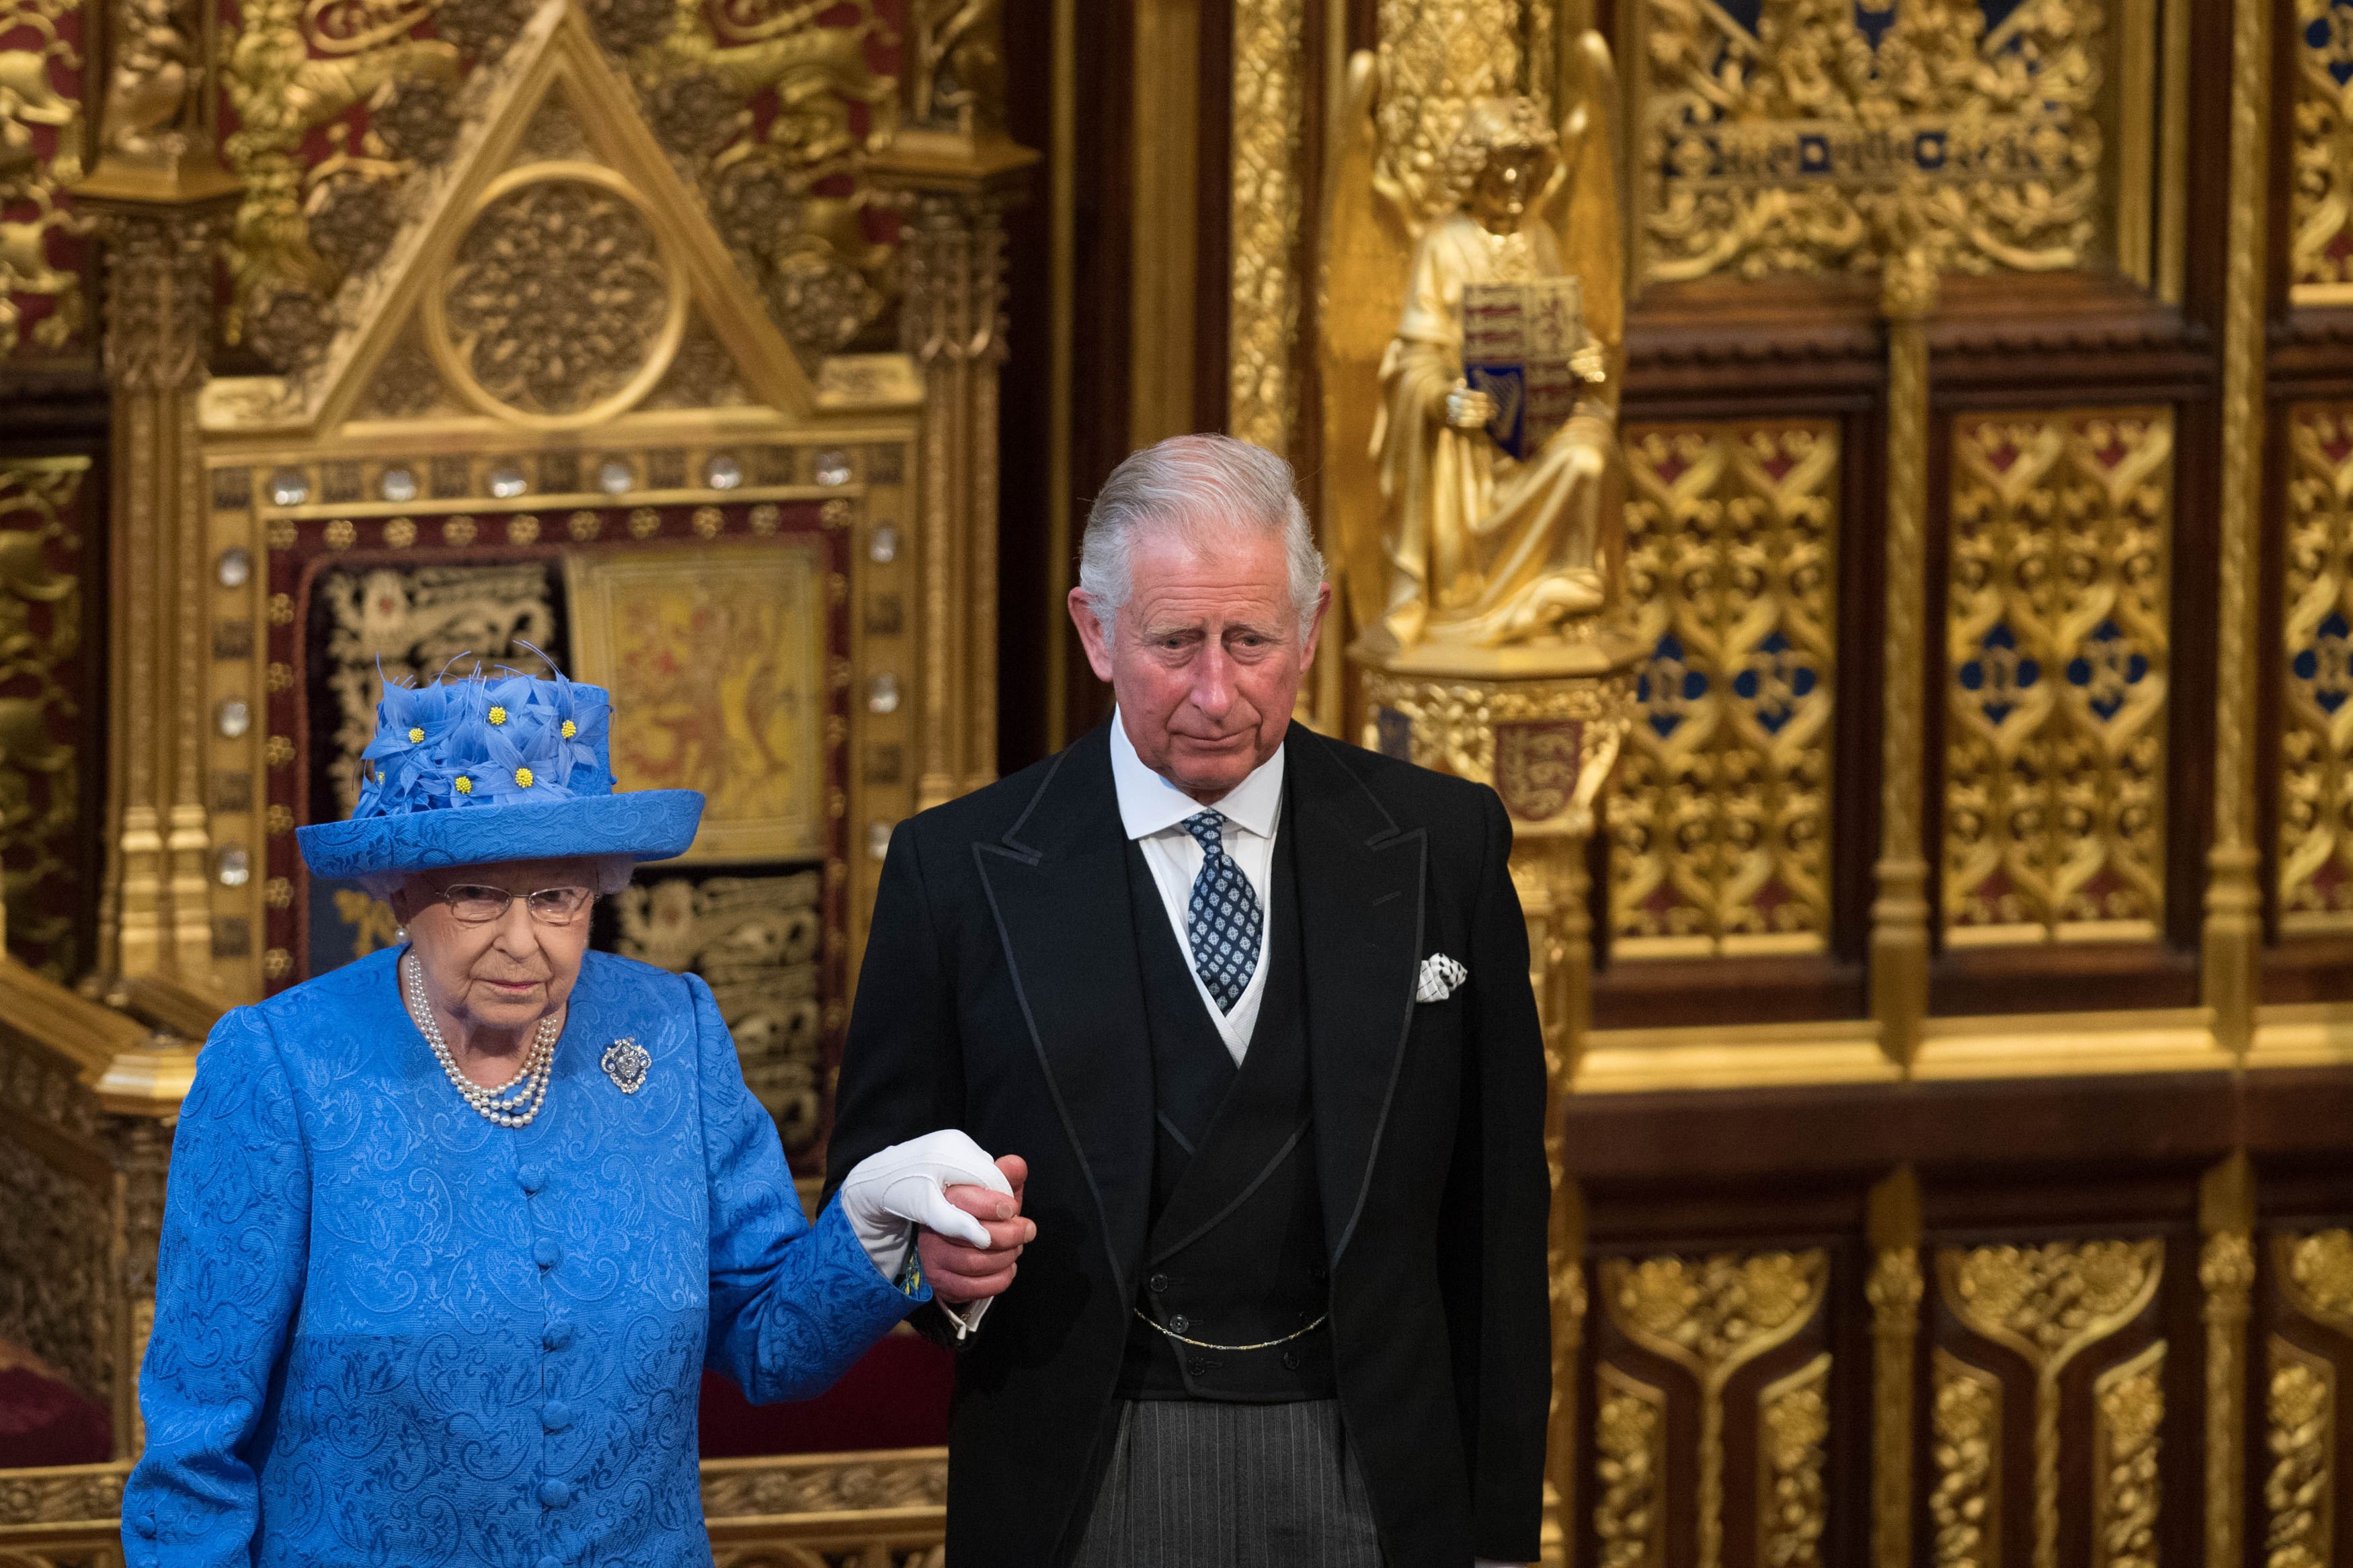 Queen Elizabeth II and her son Prince Charles attend the State Opening Of Parliament in the House of Lords at the Palace of Westminster on June 21, 2017 in London, England ┃Source: Getty Images